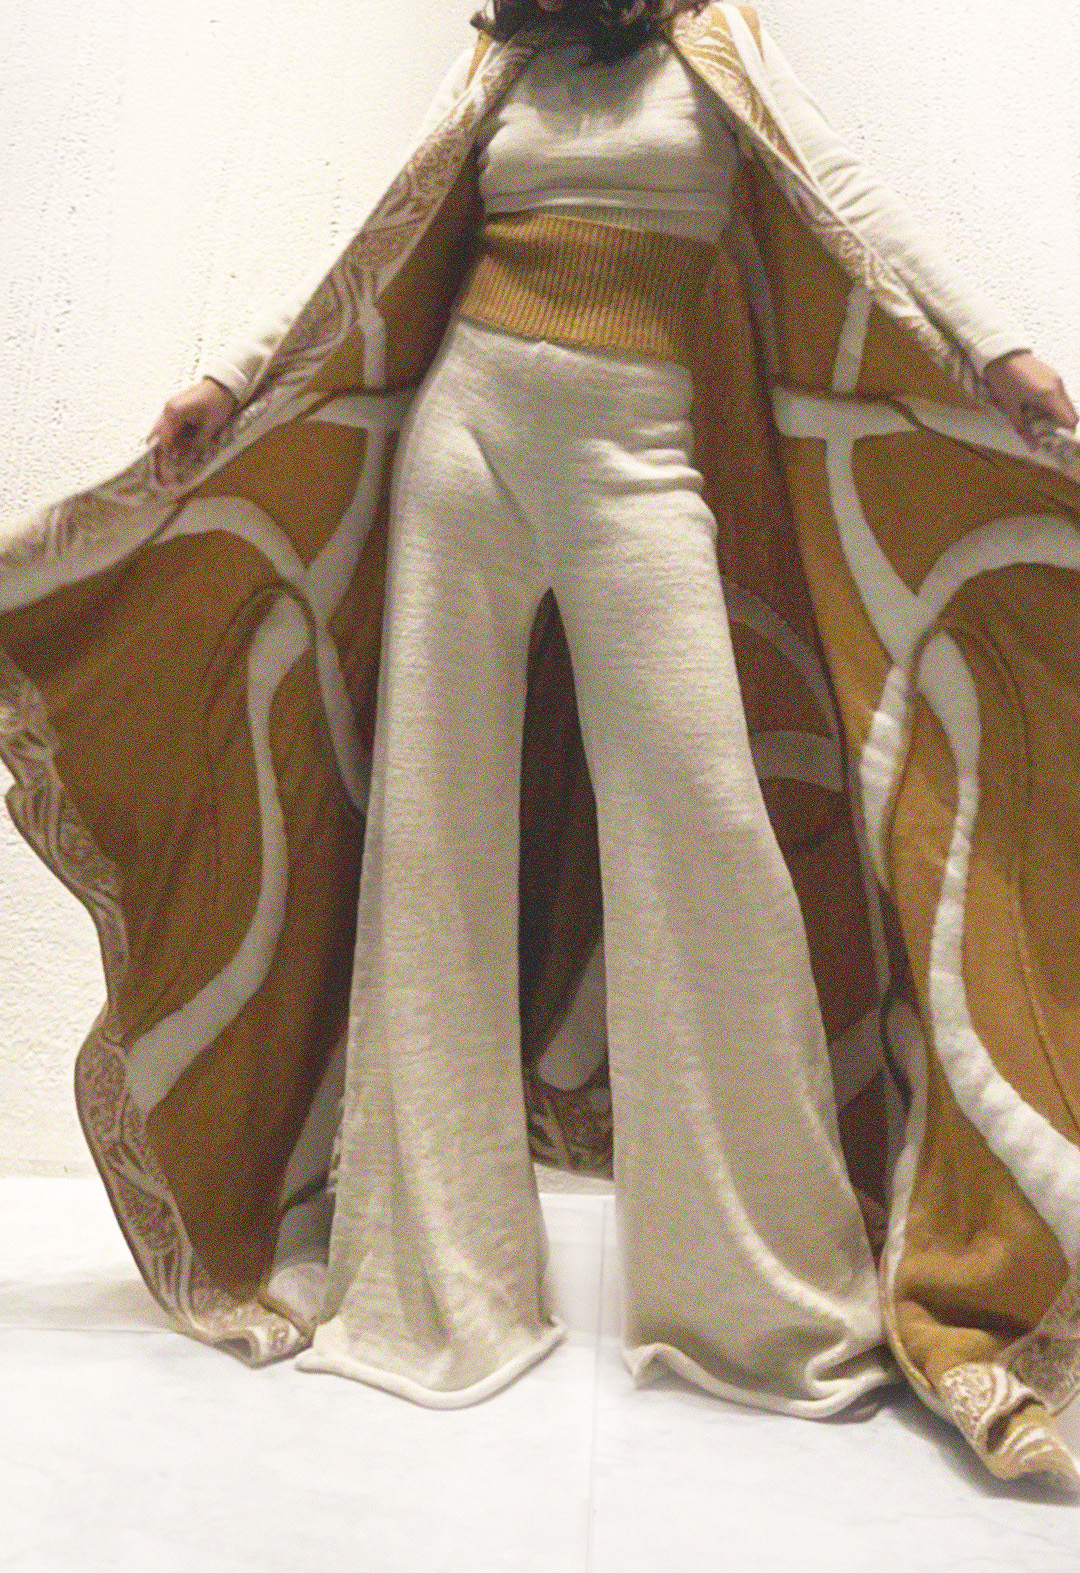 The model is wearing a two-color jacquard pattern cardigan that has a flowing line pattern all over, which is stuffed to make it look more sculptural. The cardigan is paired with matching white full-sleeve top and white legged pants with a double-rib waistband. She is holding the cape wide open with her hands, which allows us to see the inside of the reversible cape and a full view of the pants and top. The background is white.